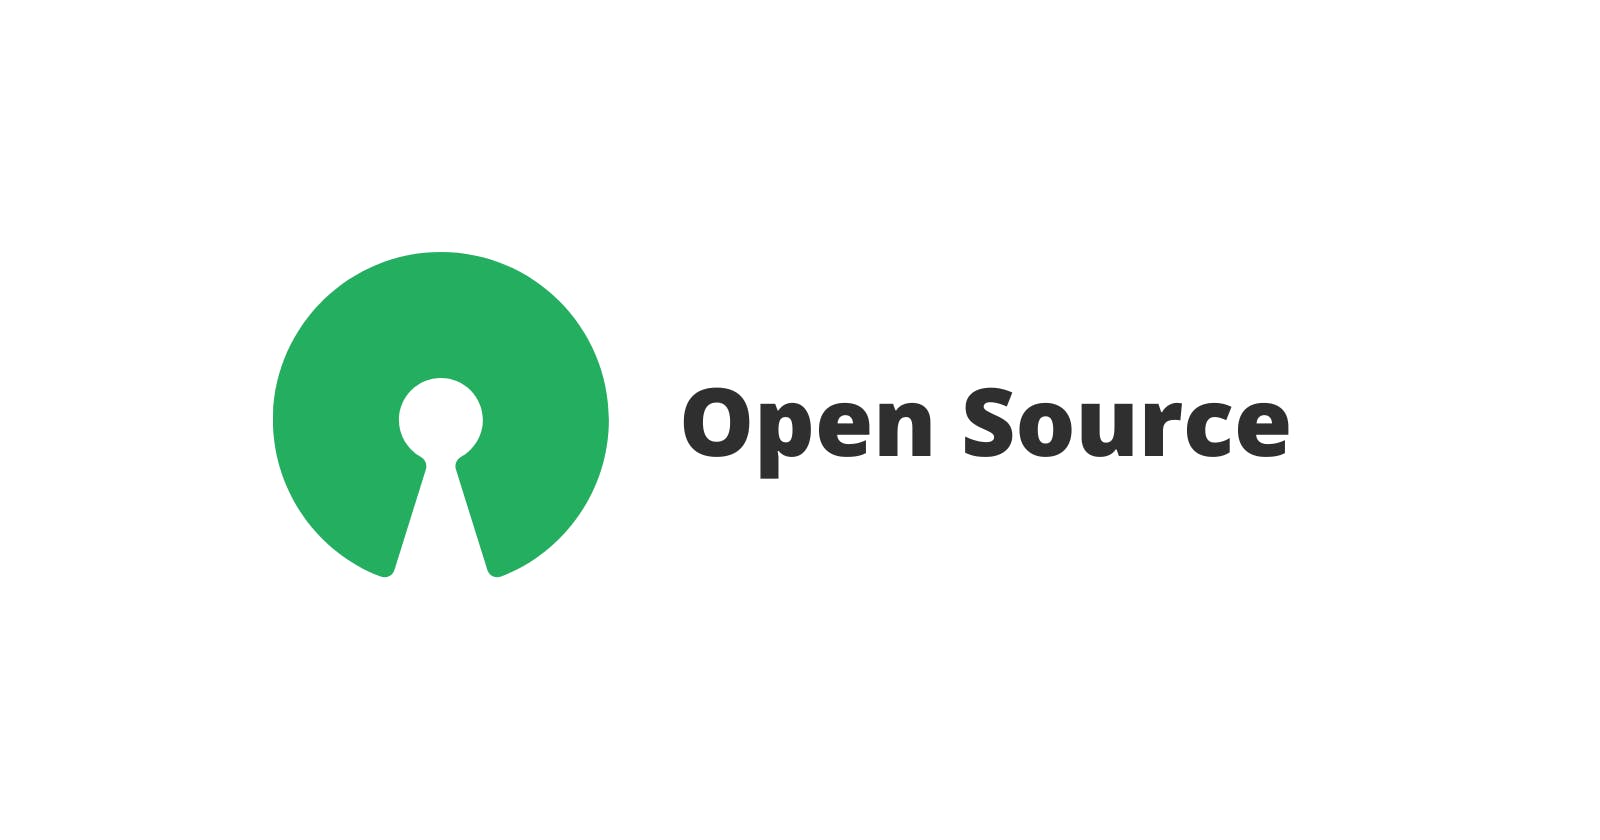 Getting Started with Open Source